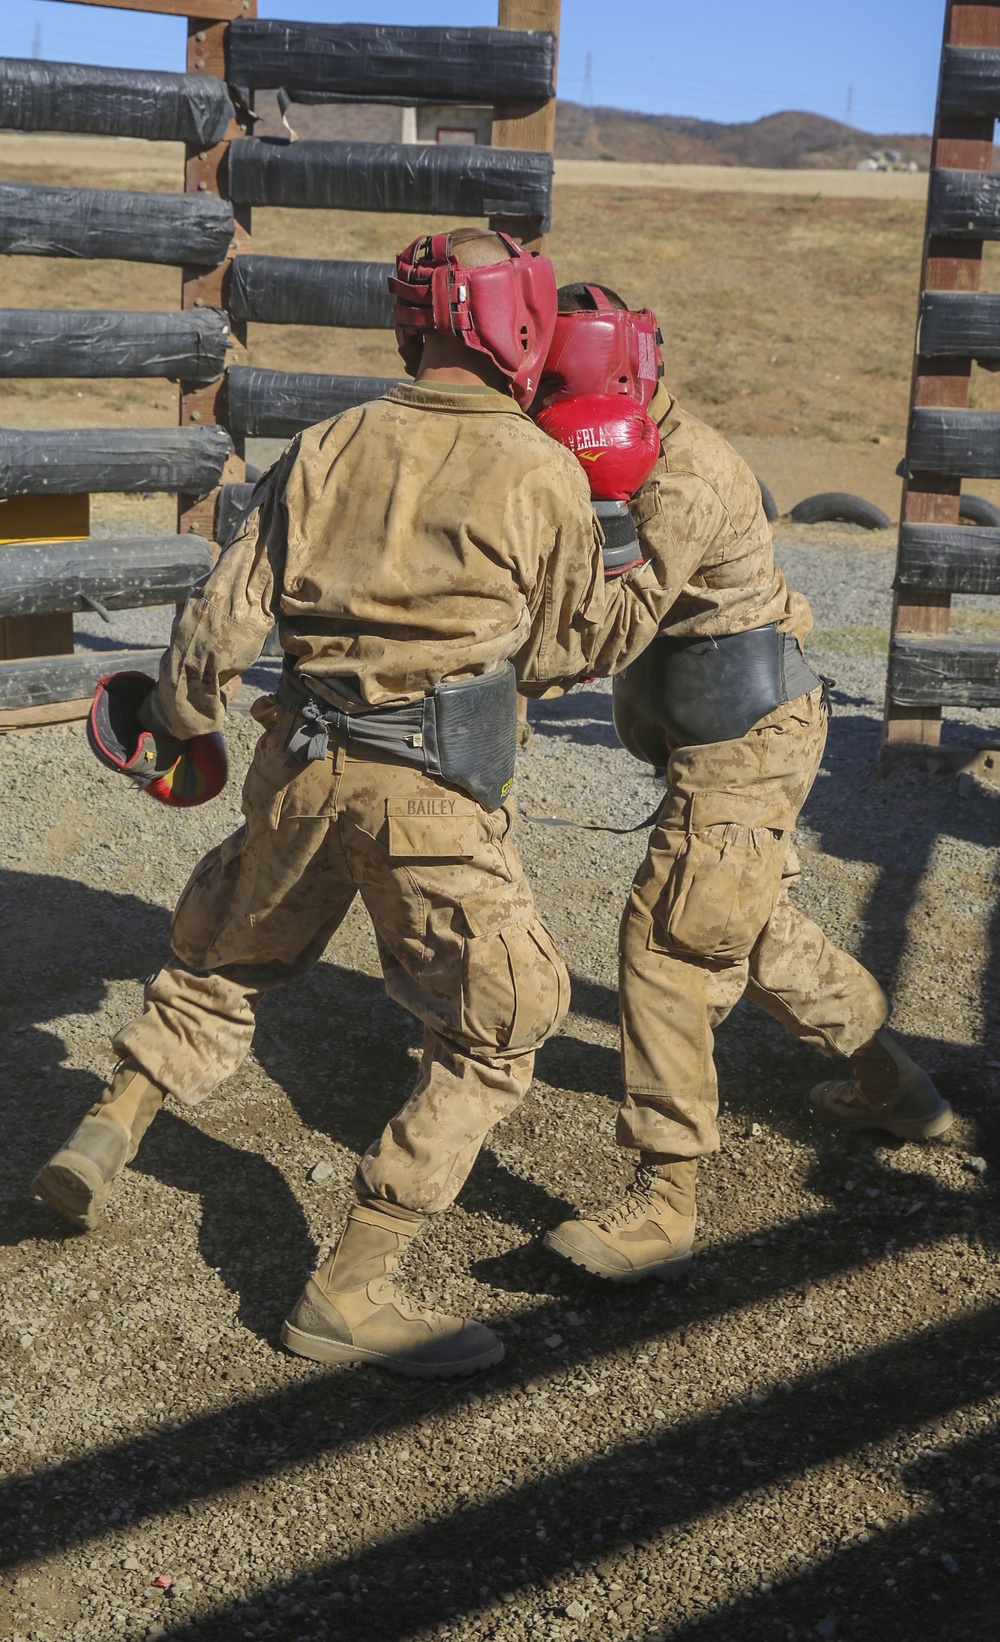 New Marine strives for stabilty with Marine Corps